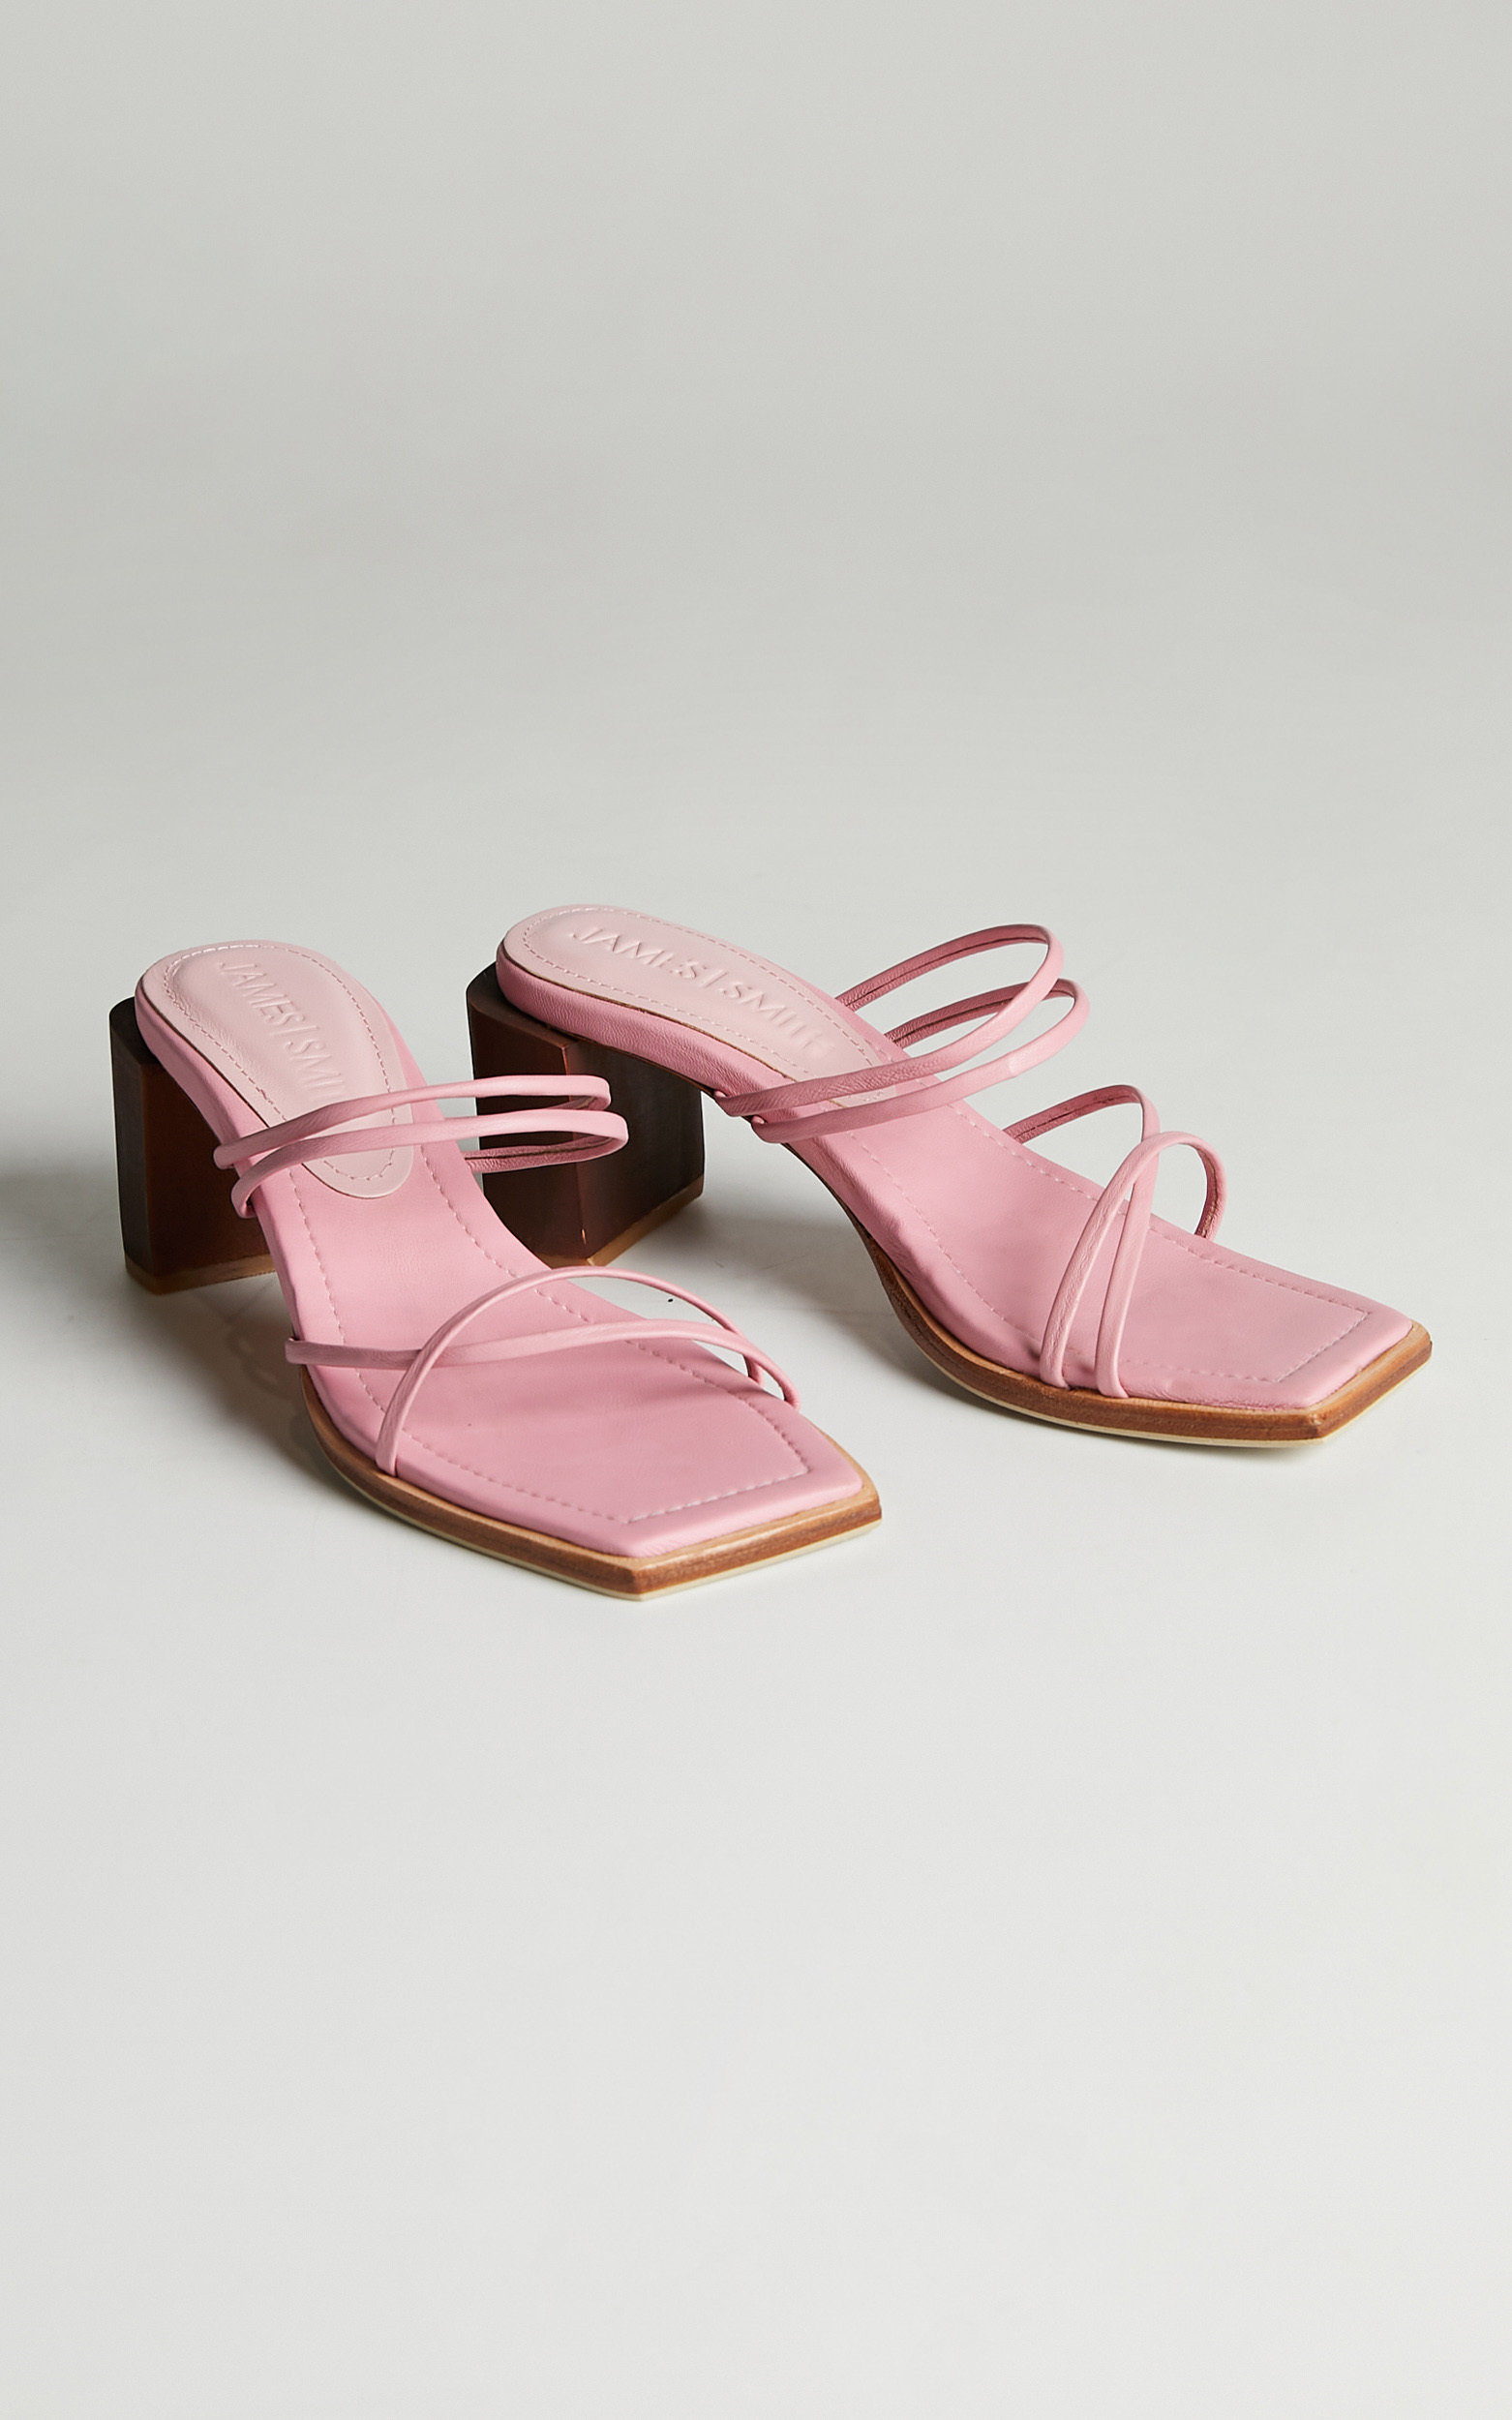 James Smith - Ravello Sandal in Pink - 05, PNK1, hi-res image number null